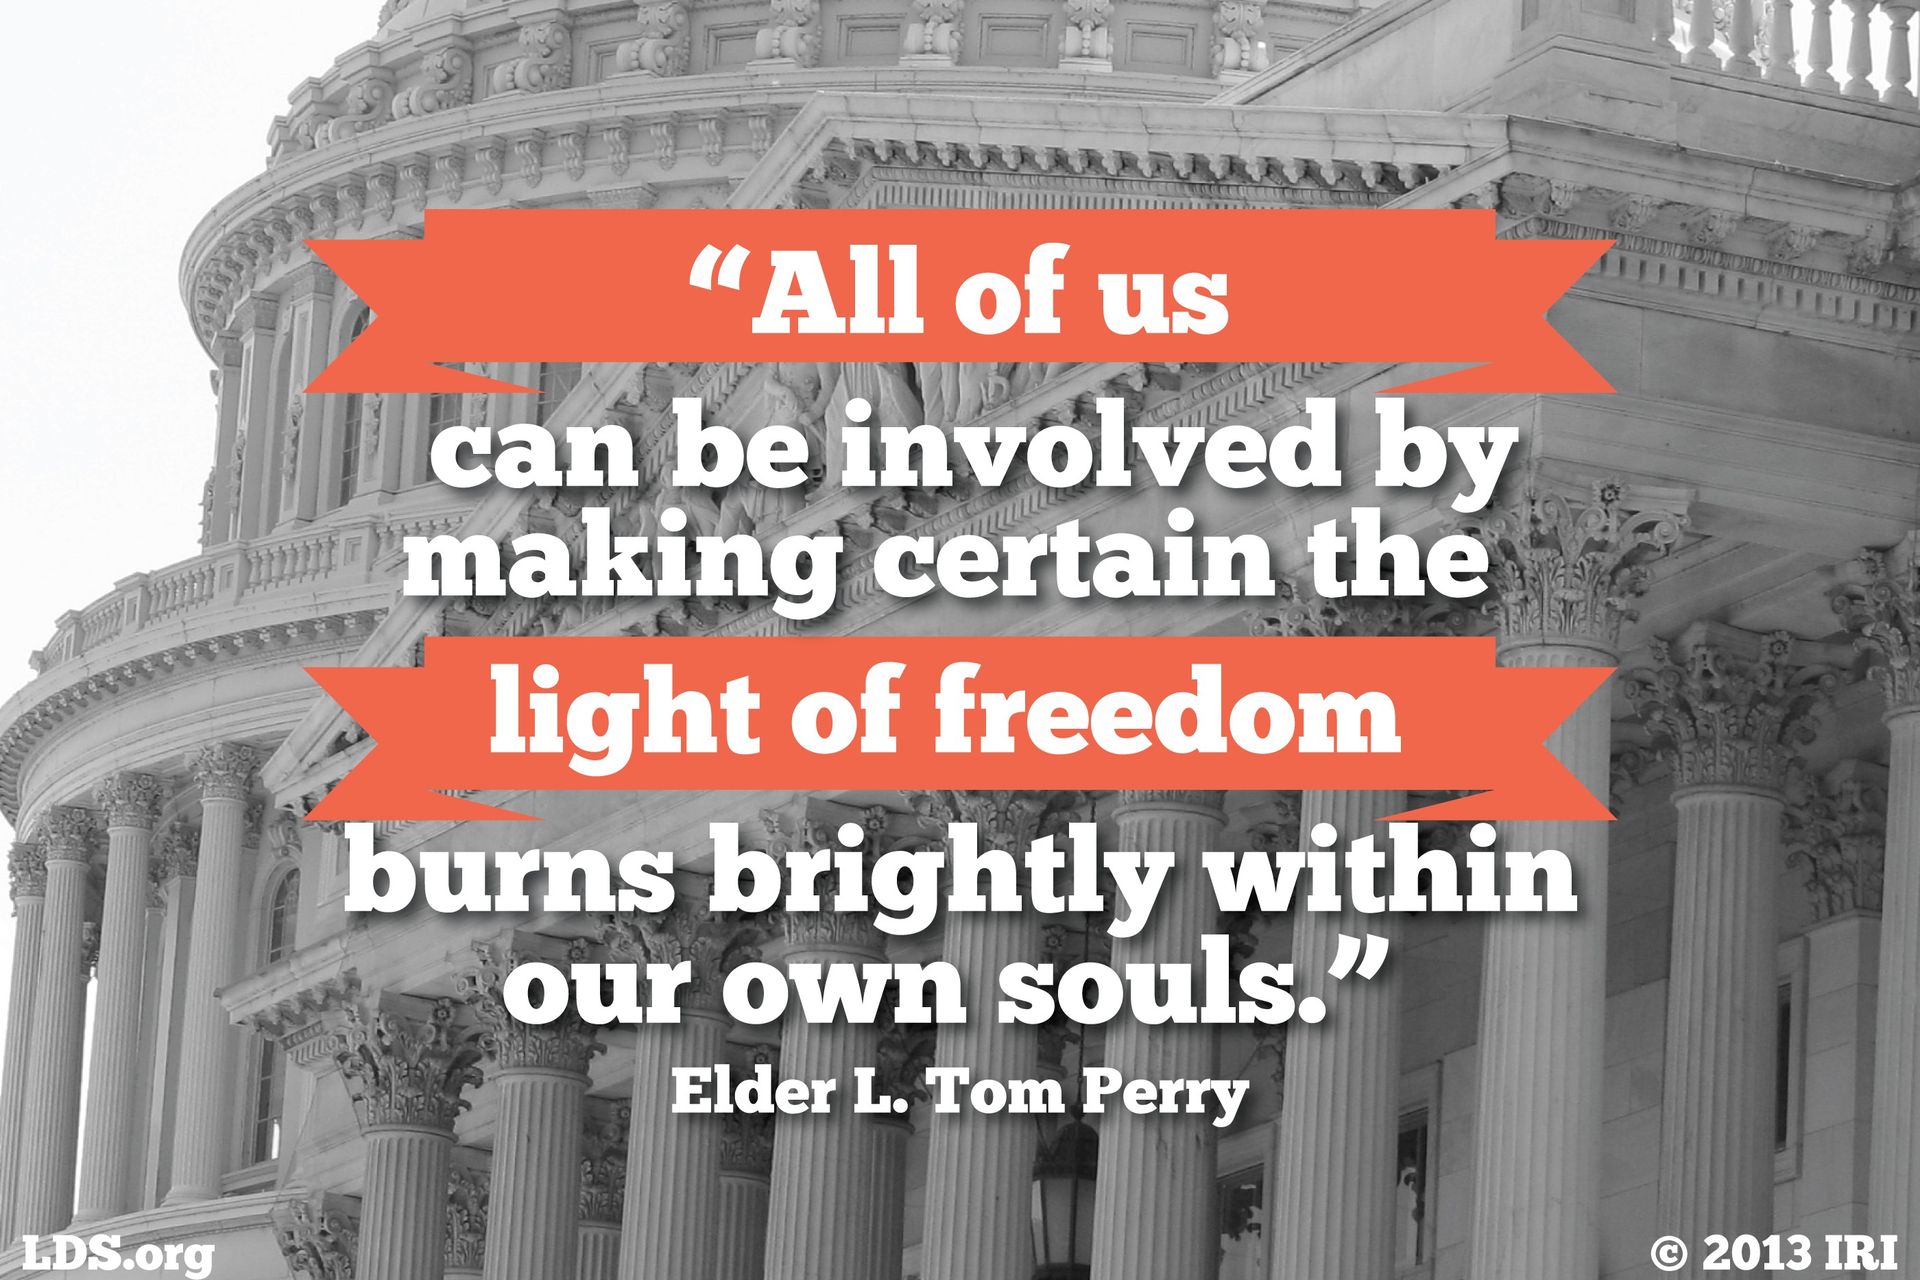 “All of us can be involved by making certain the light of freedom burns brightly within our own souls.”—Elder L. Tom Perry, “Family Traditions” © undefined ipCode 1.